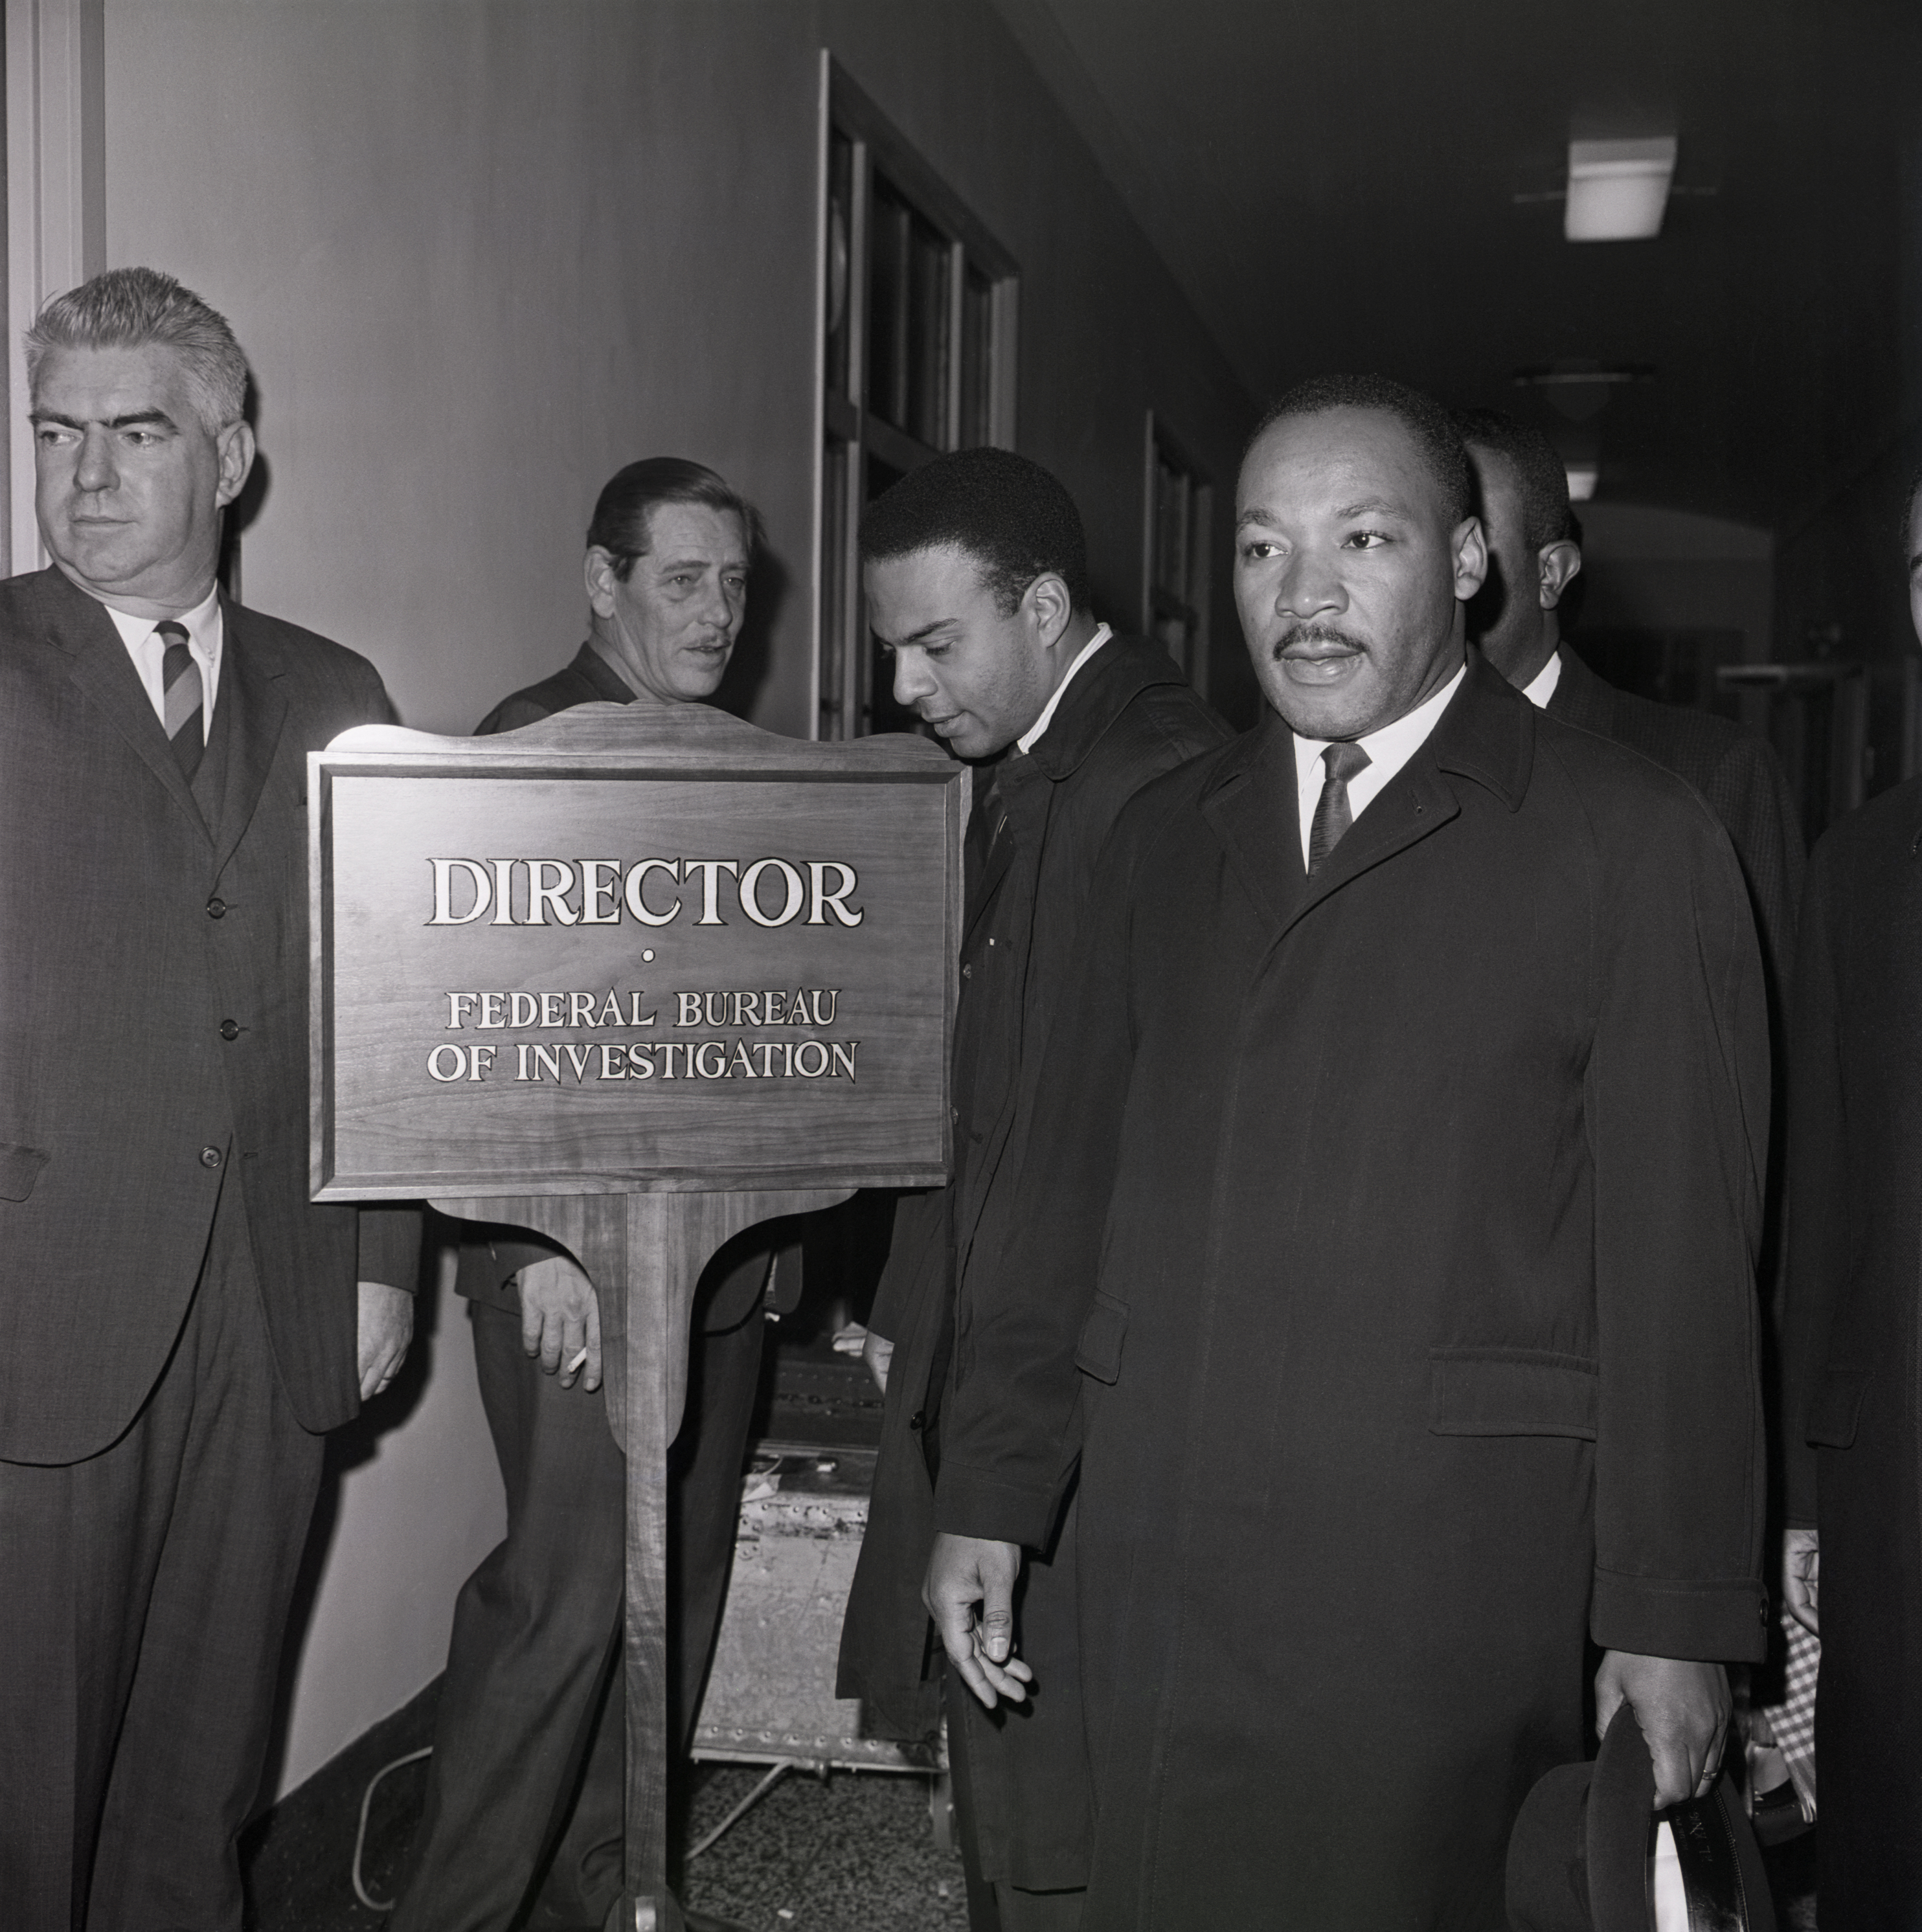 Martin Luther King Jr. at the Federal Bureau of Investigation to speak with director J. Edgar Hoover, who had recently called the civil rights leader a "notorious liar". The story of the FBI's surveillance and harassment of King is explored in the new documentary 'MLK/FBI' (Bettmann Archive)